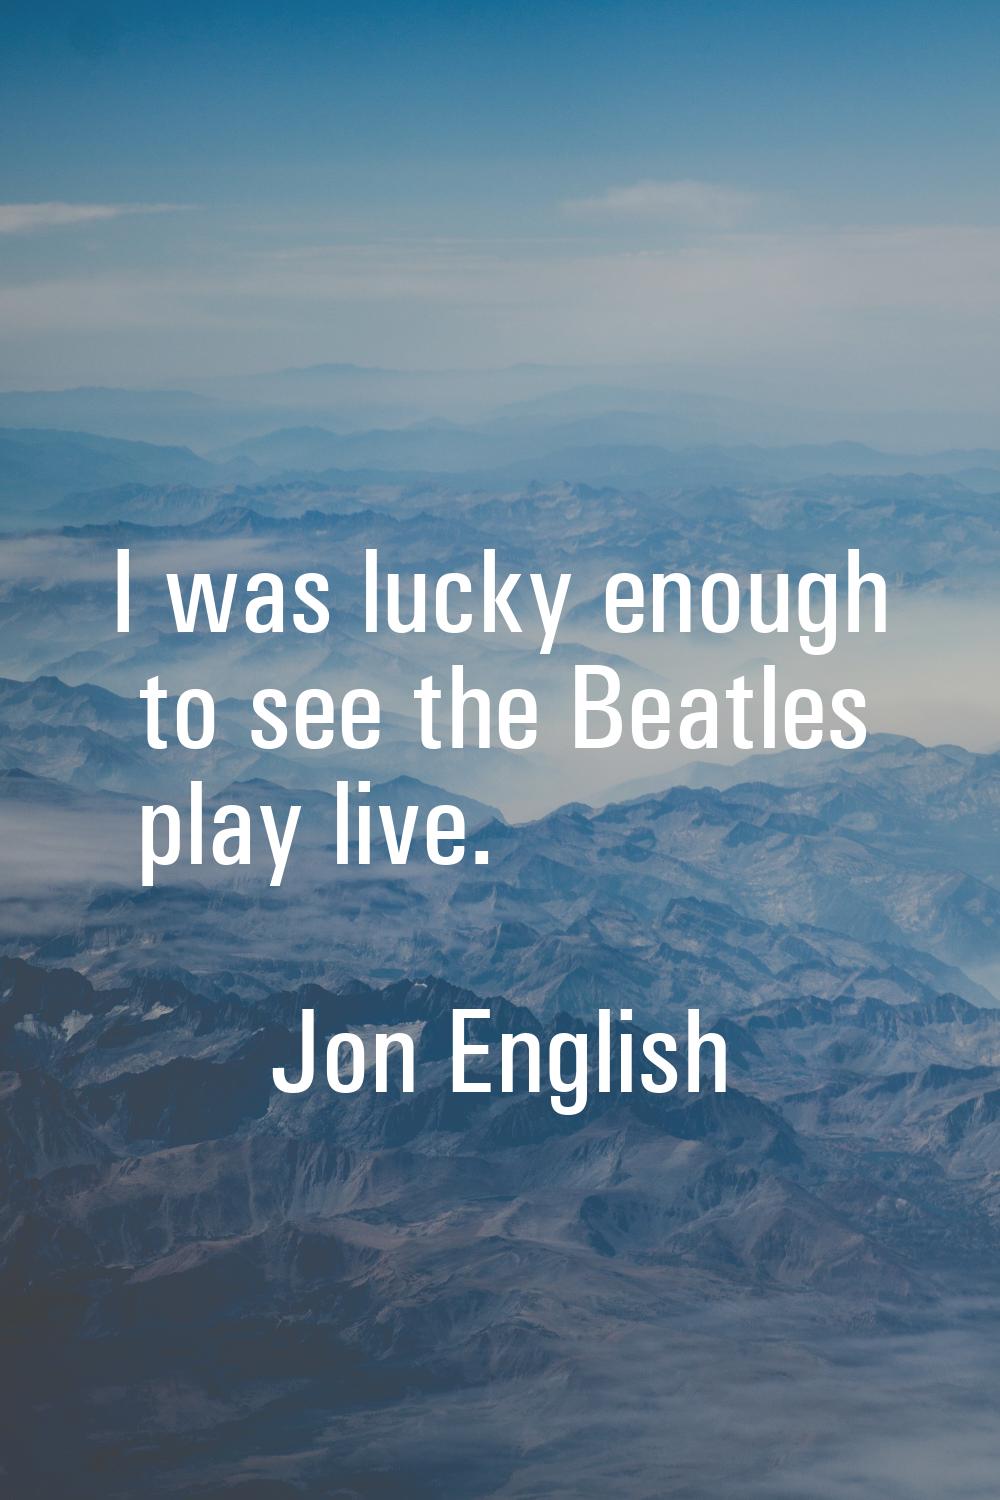 I was lucky enough to see the Beatles play live.